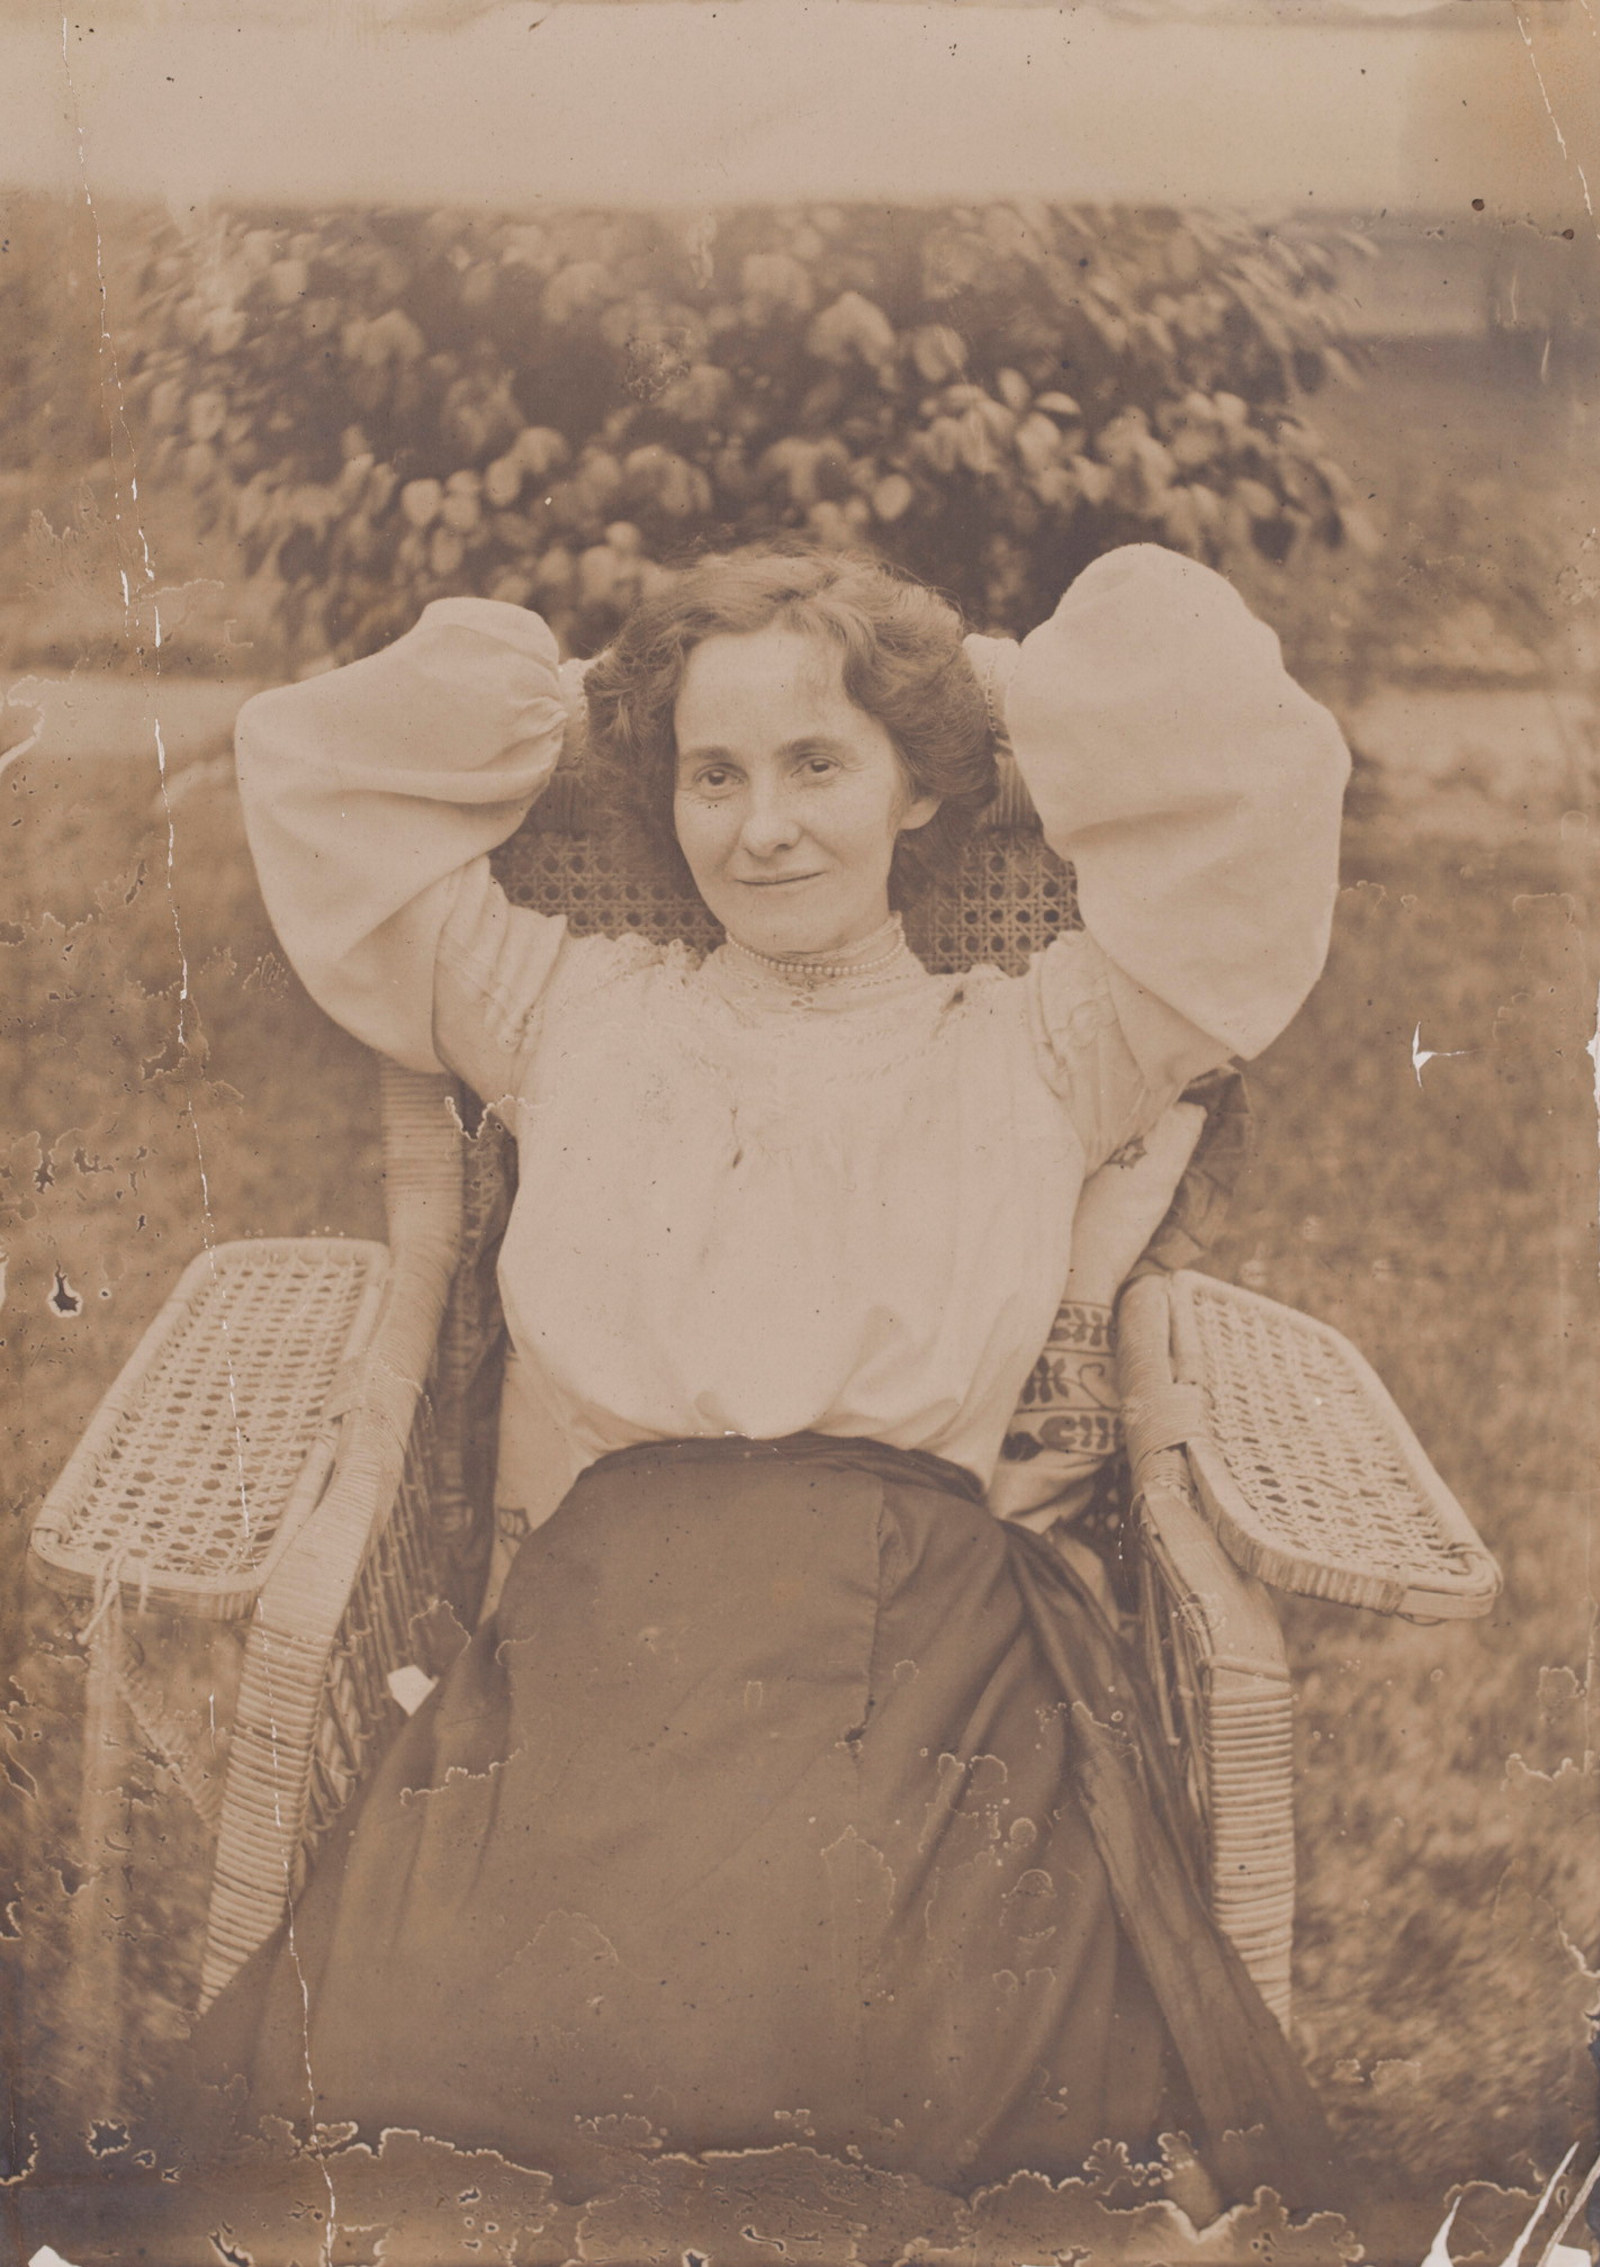 Tot Thorburn at ease in a cane armchair in the garden at Meroogal, around 1905